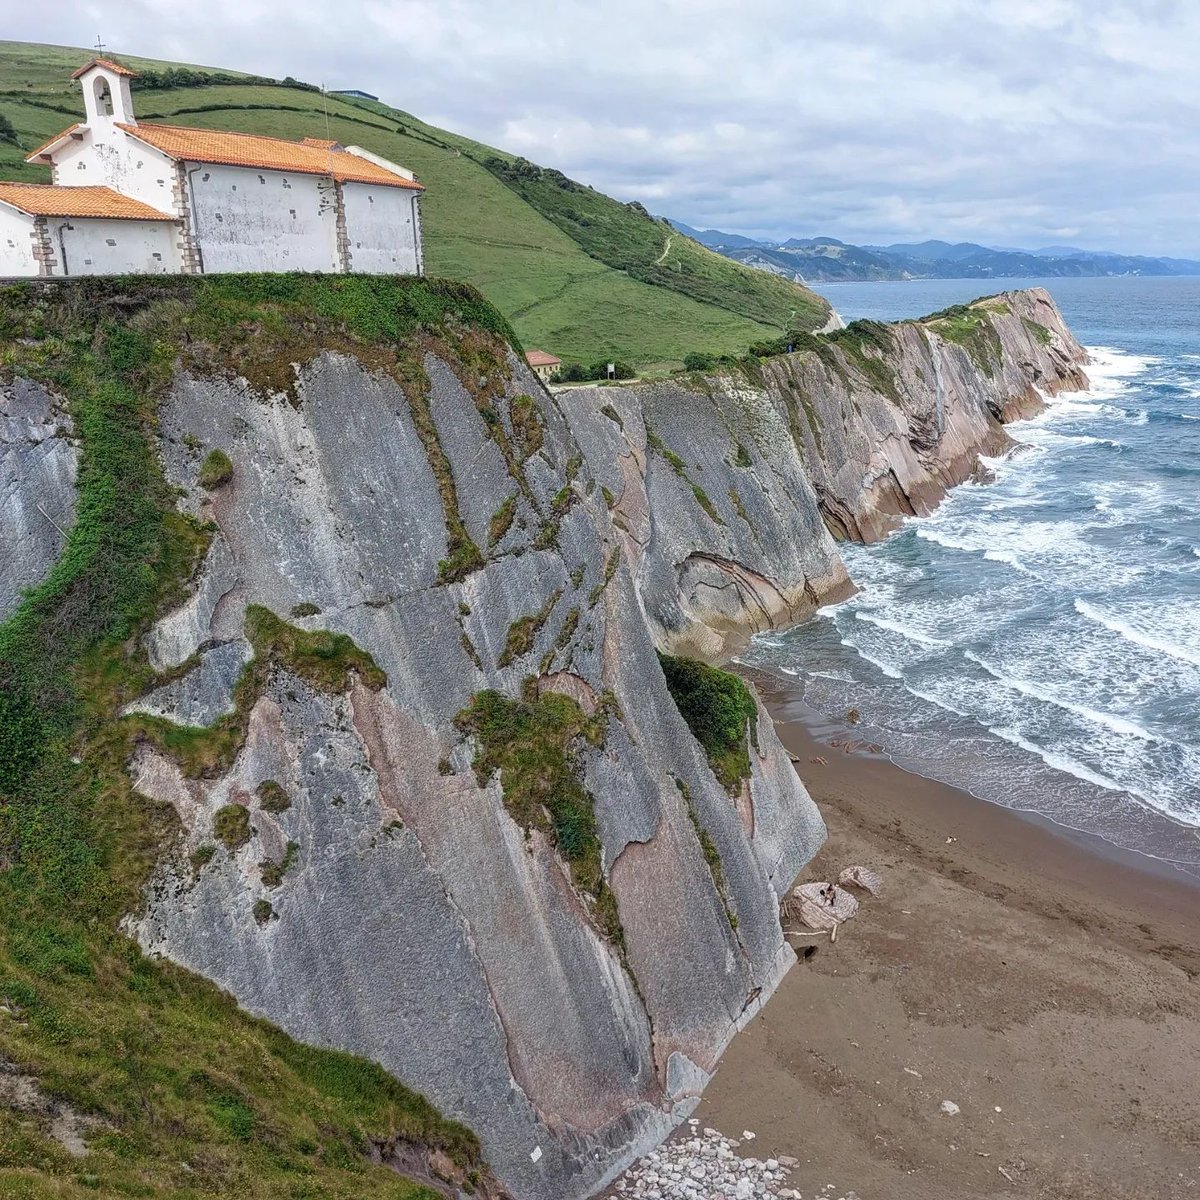 Game of Thrones fans may recognize this place along the coast in Basque Country. Itzurum Beach in Zumaia. Spectacular view.
.
.
#got #Travel #visitbasquecountry #visiteuskadi #basque  #visitspain #beach